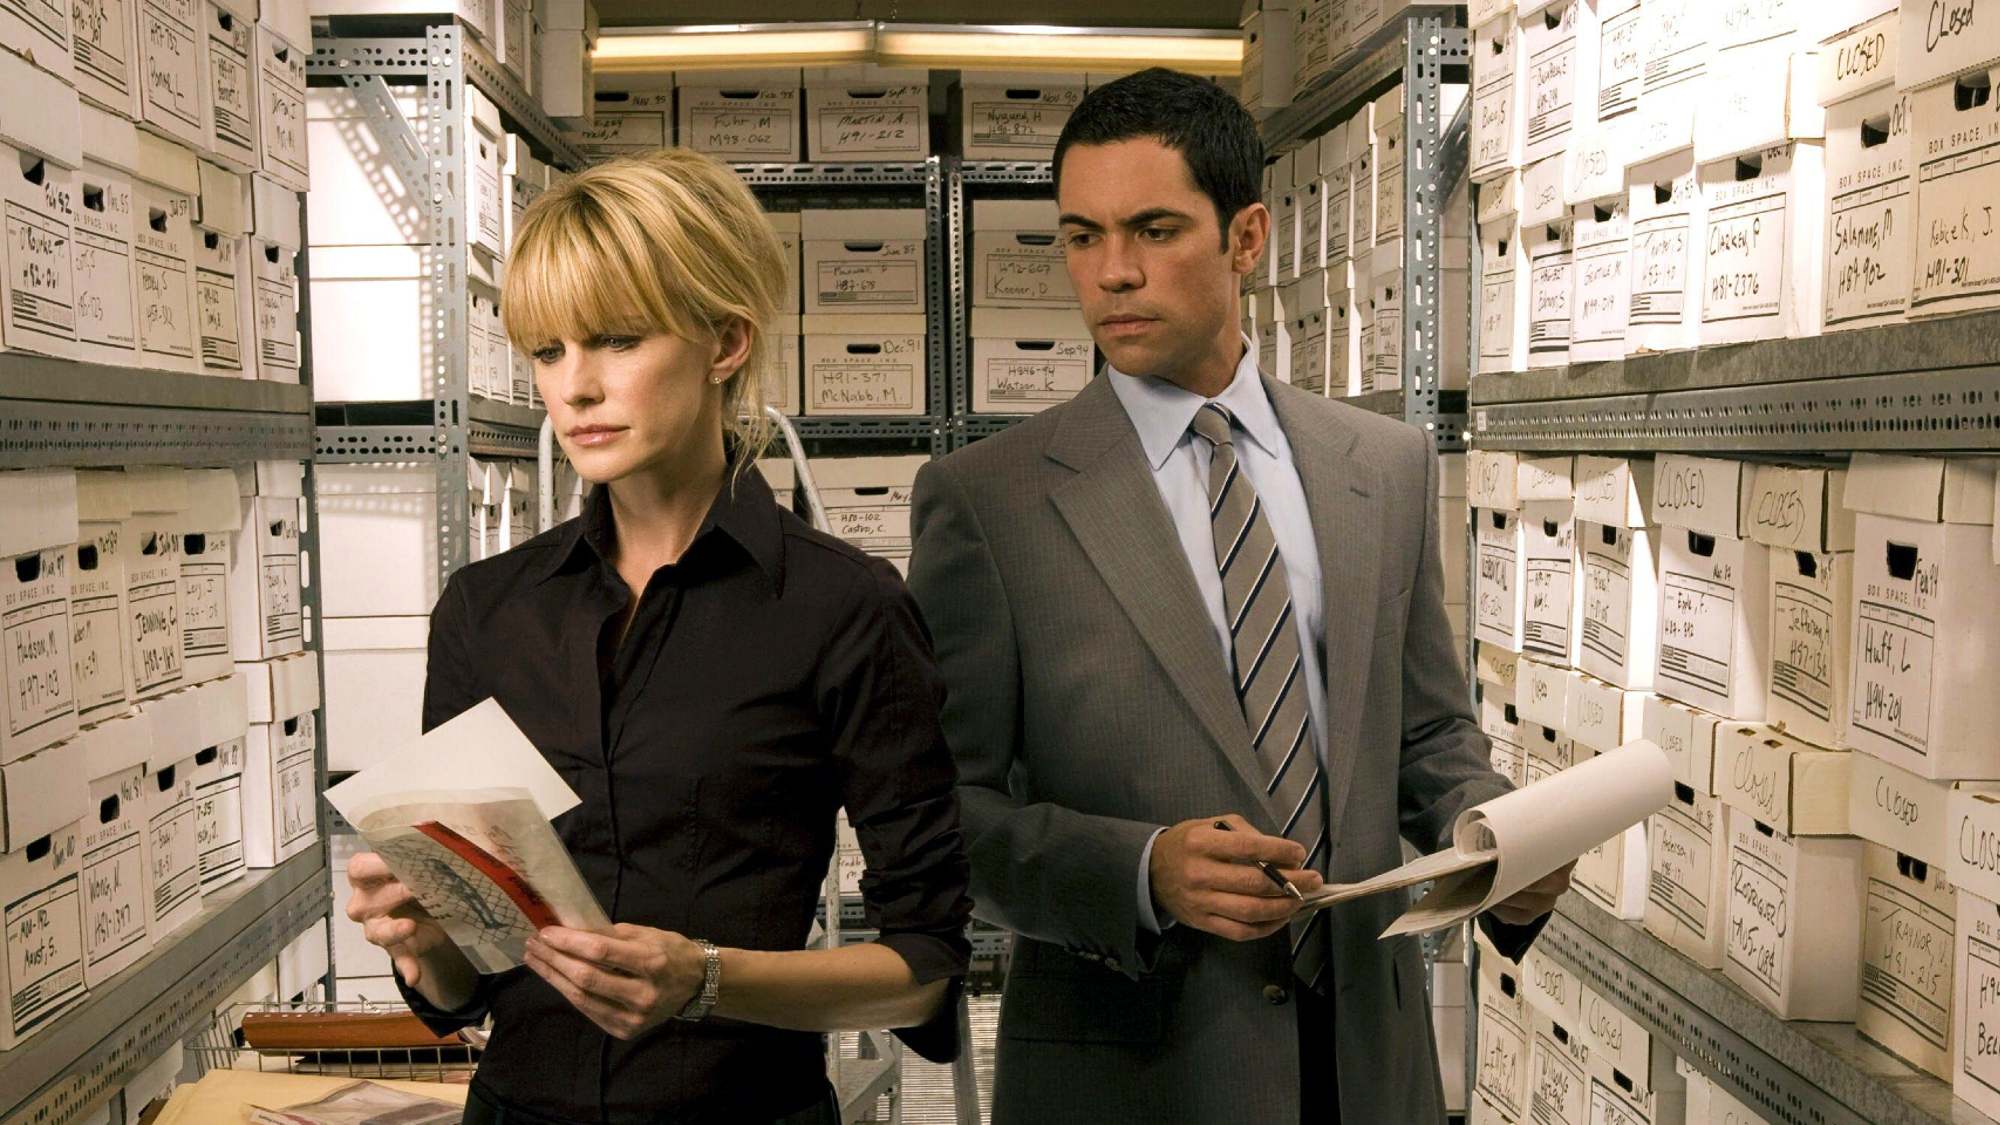 Kathryn Morris and Danny Pino in Cold Case